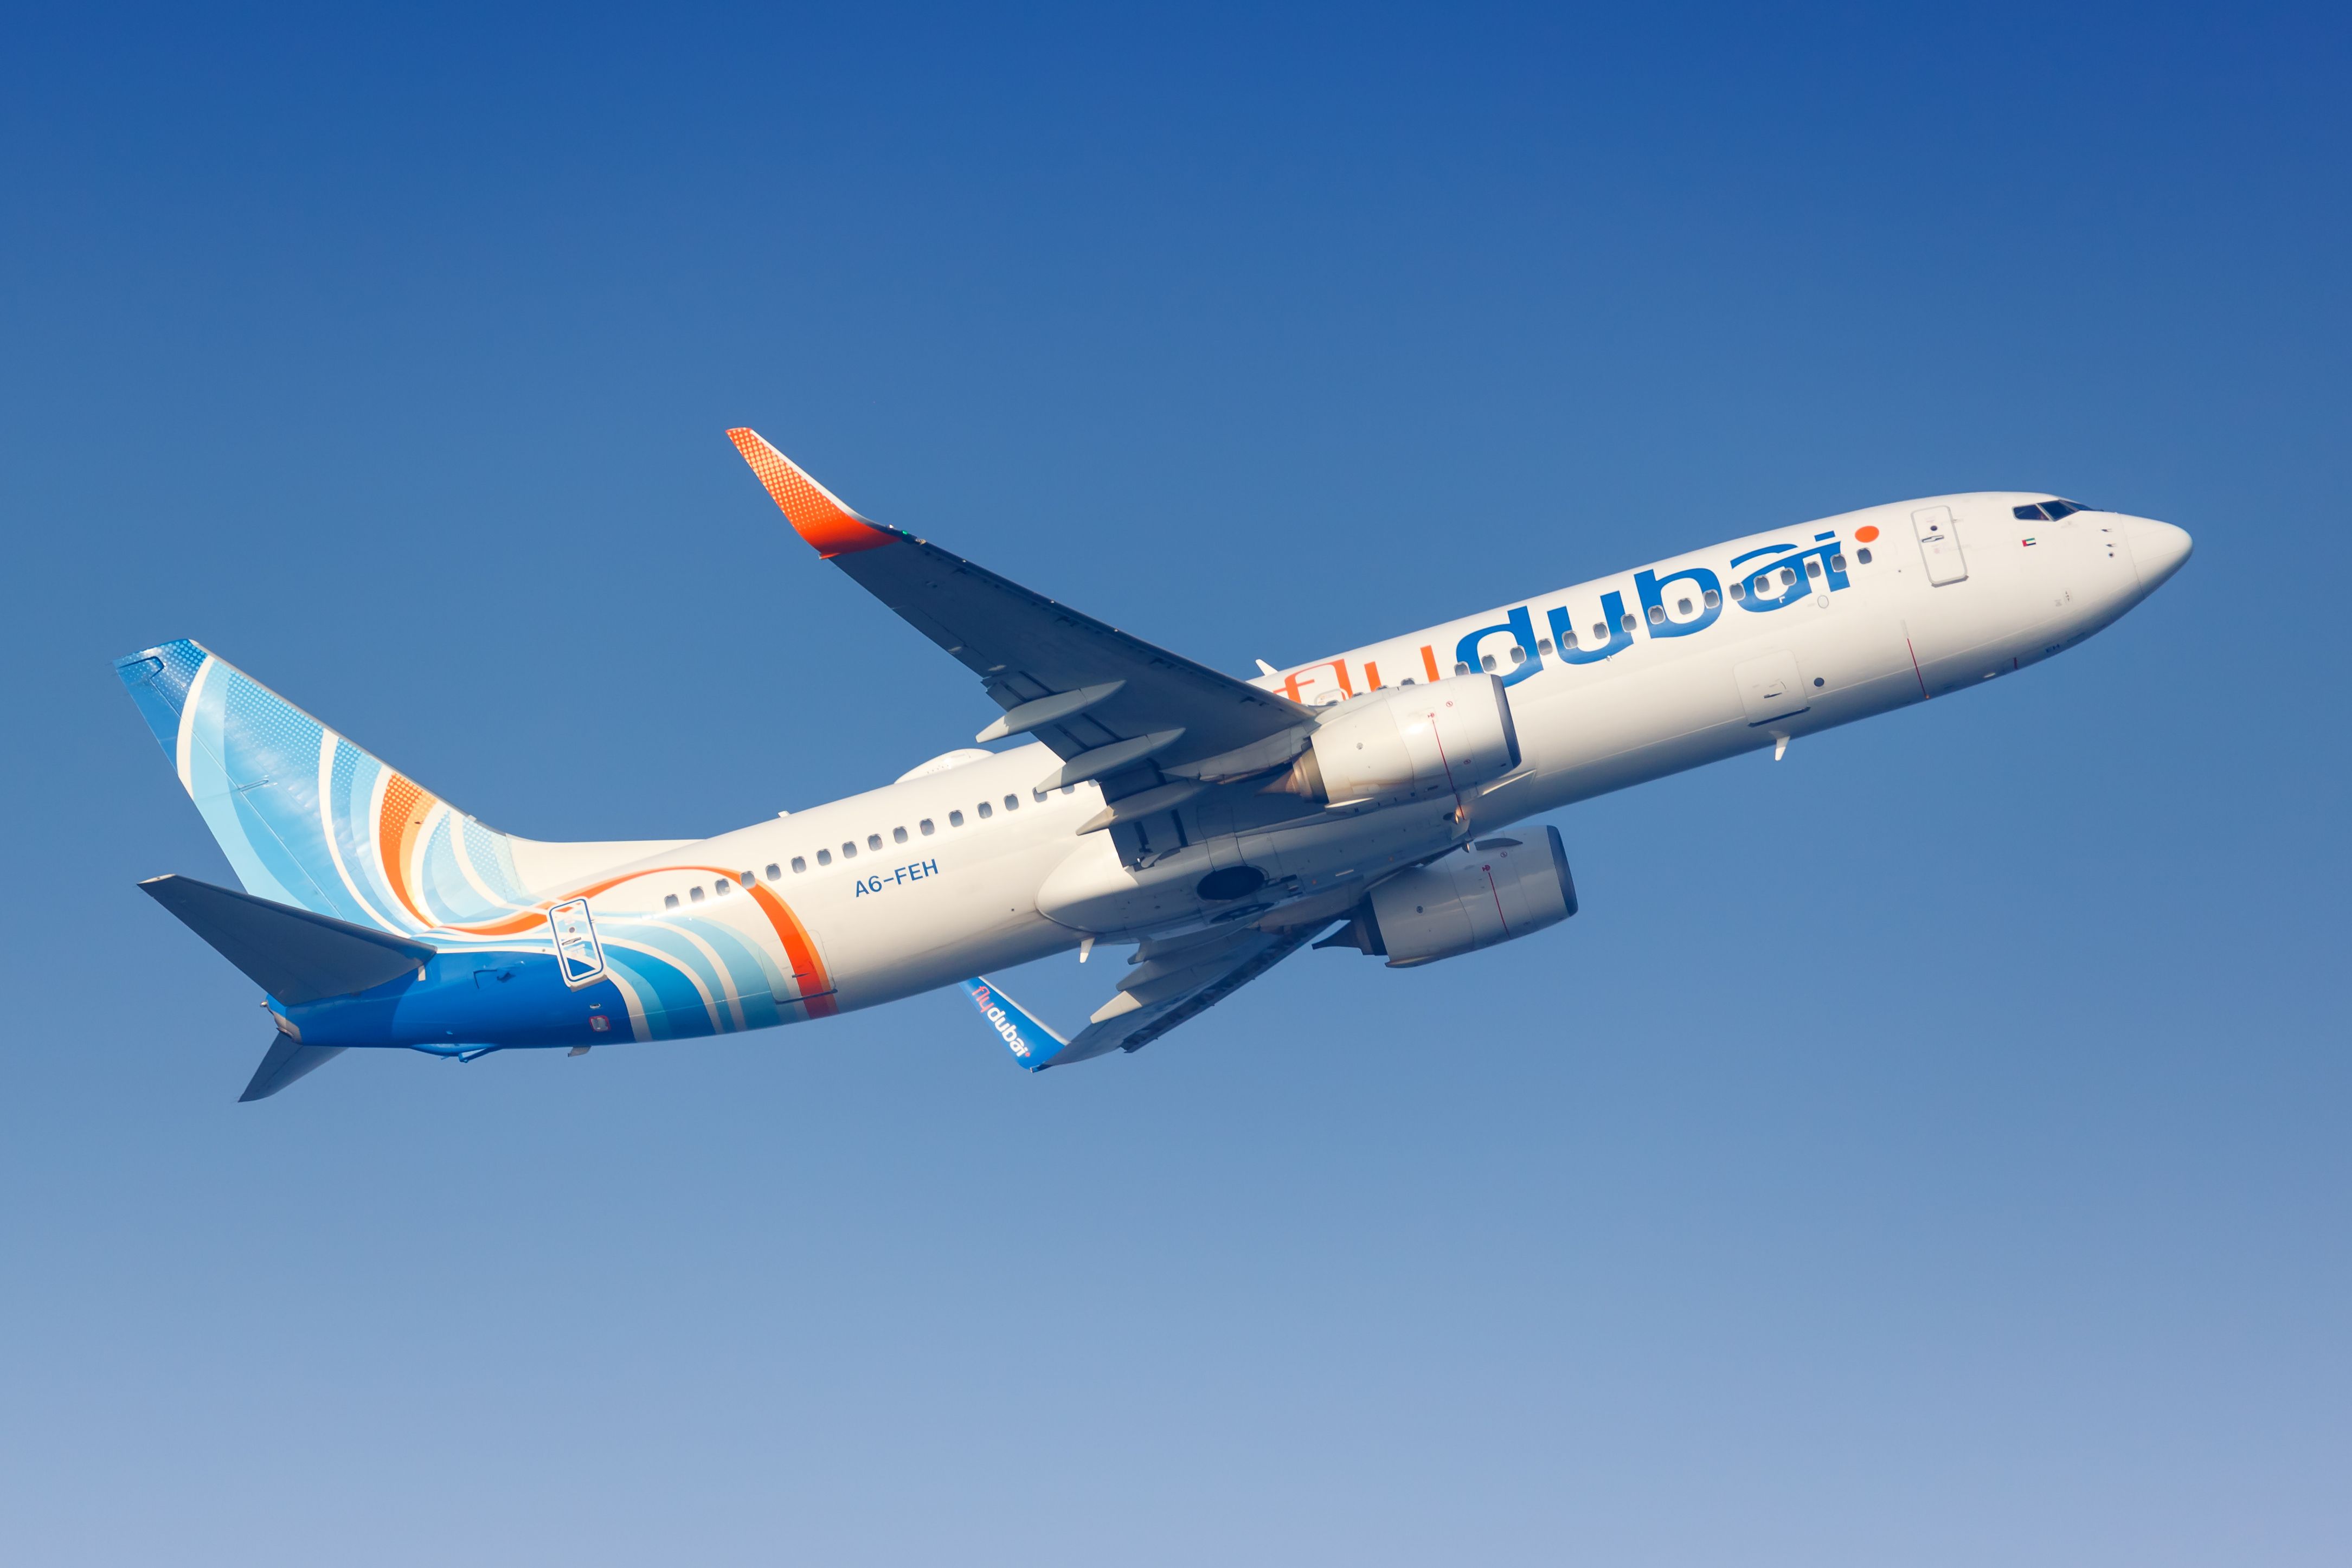 Flydubai Is On A Hiring Spree Looking for 1,120 New Workers